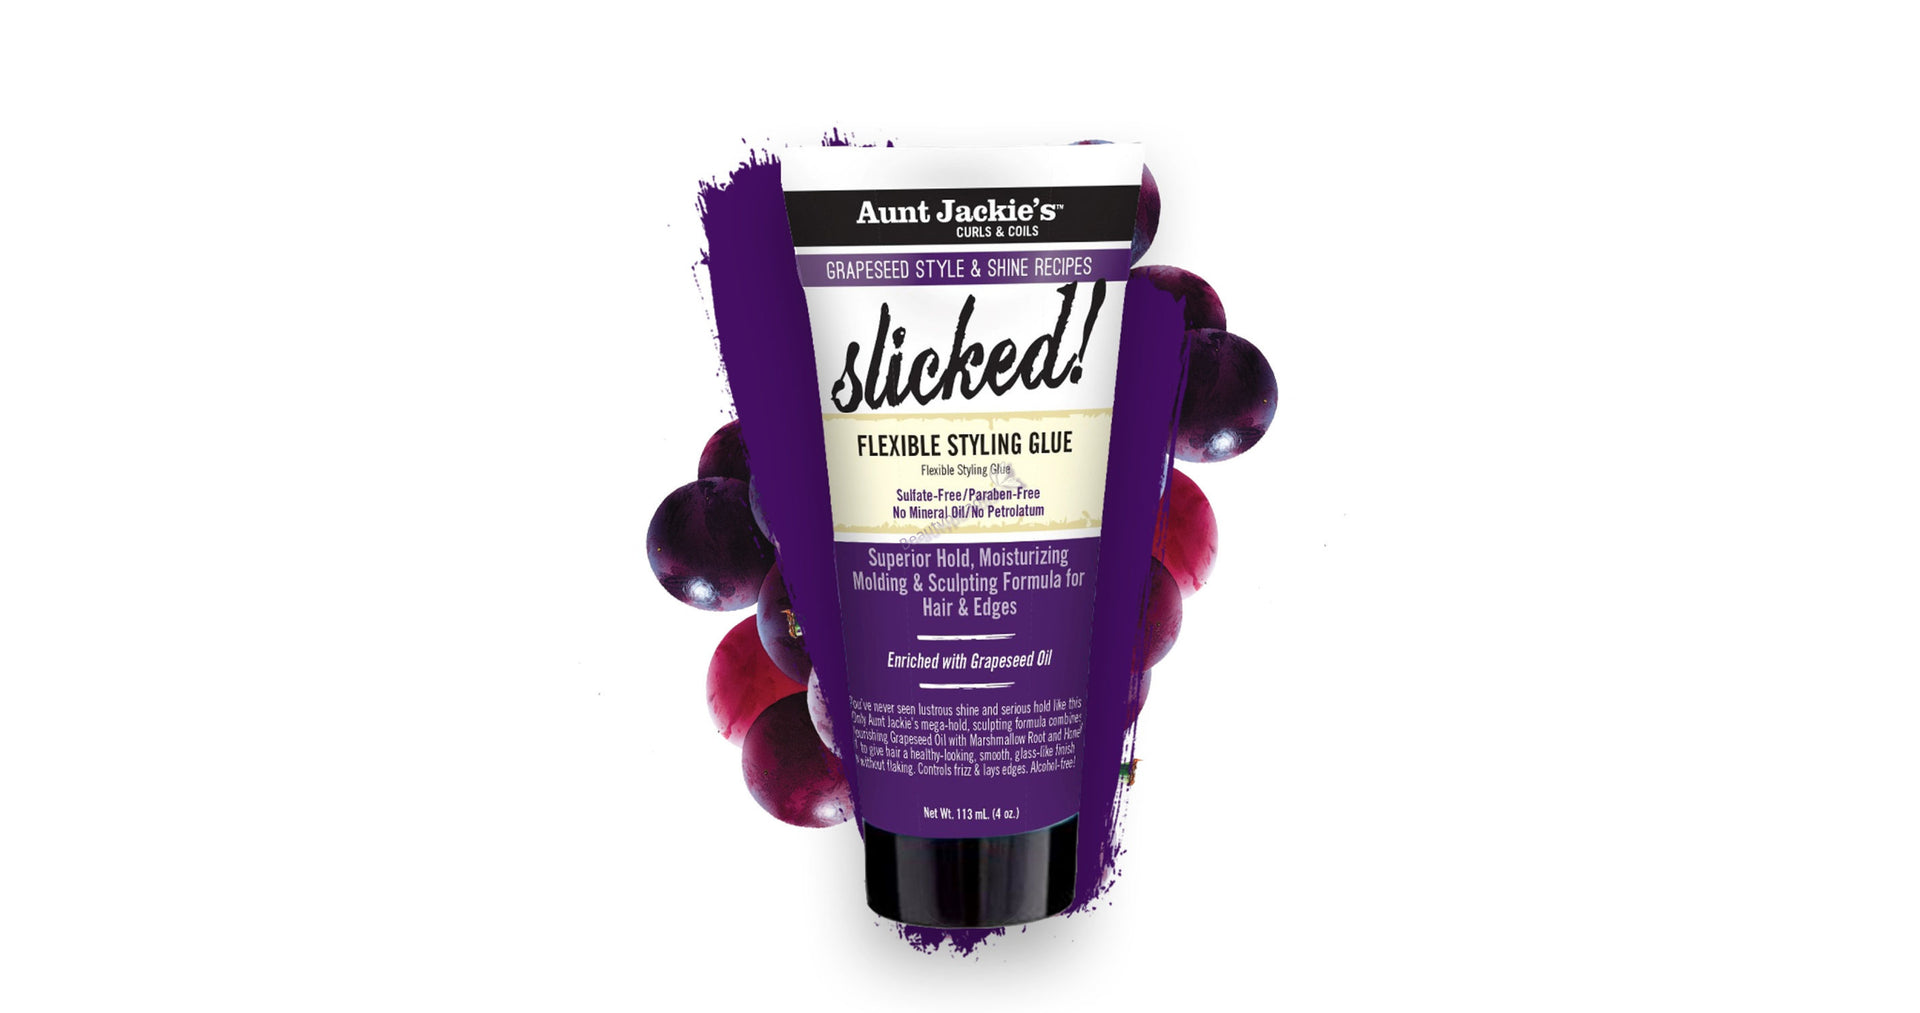 Aunt Jackie's Grapeseed Slicked Flexible Styling Glue 114g